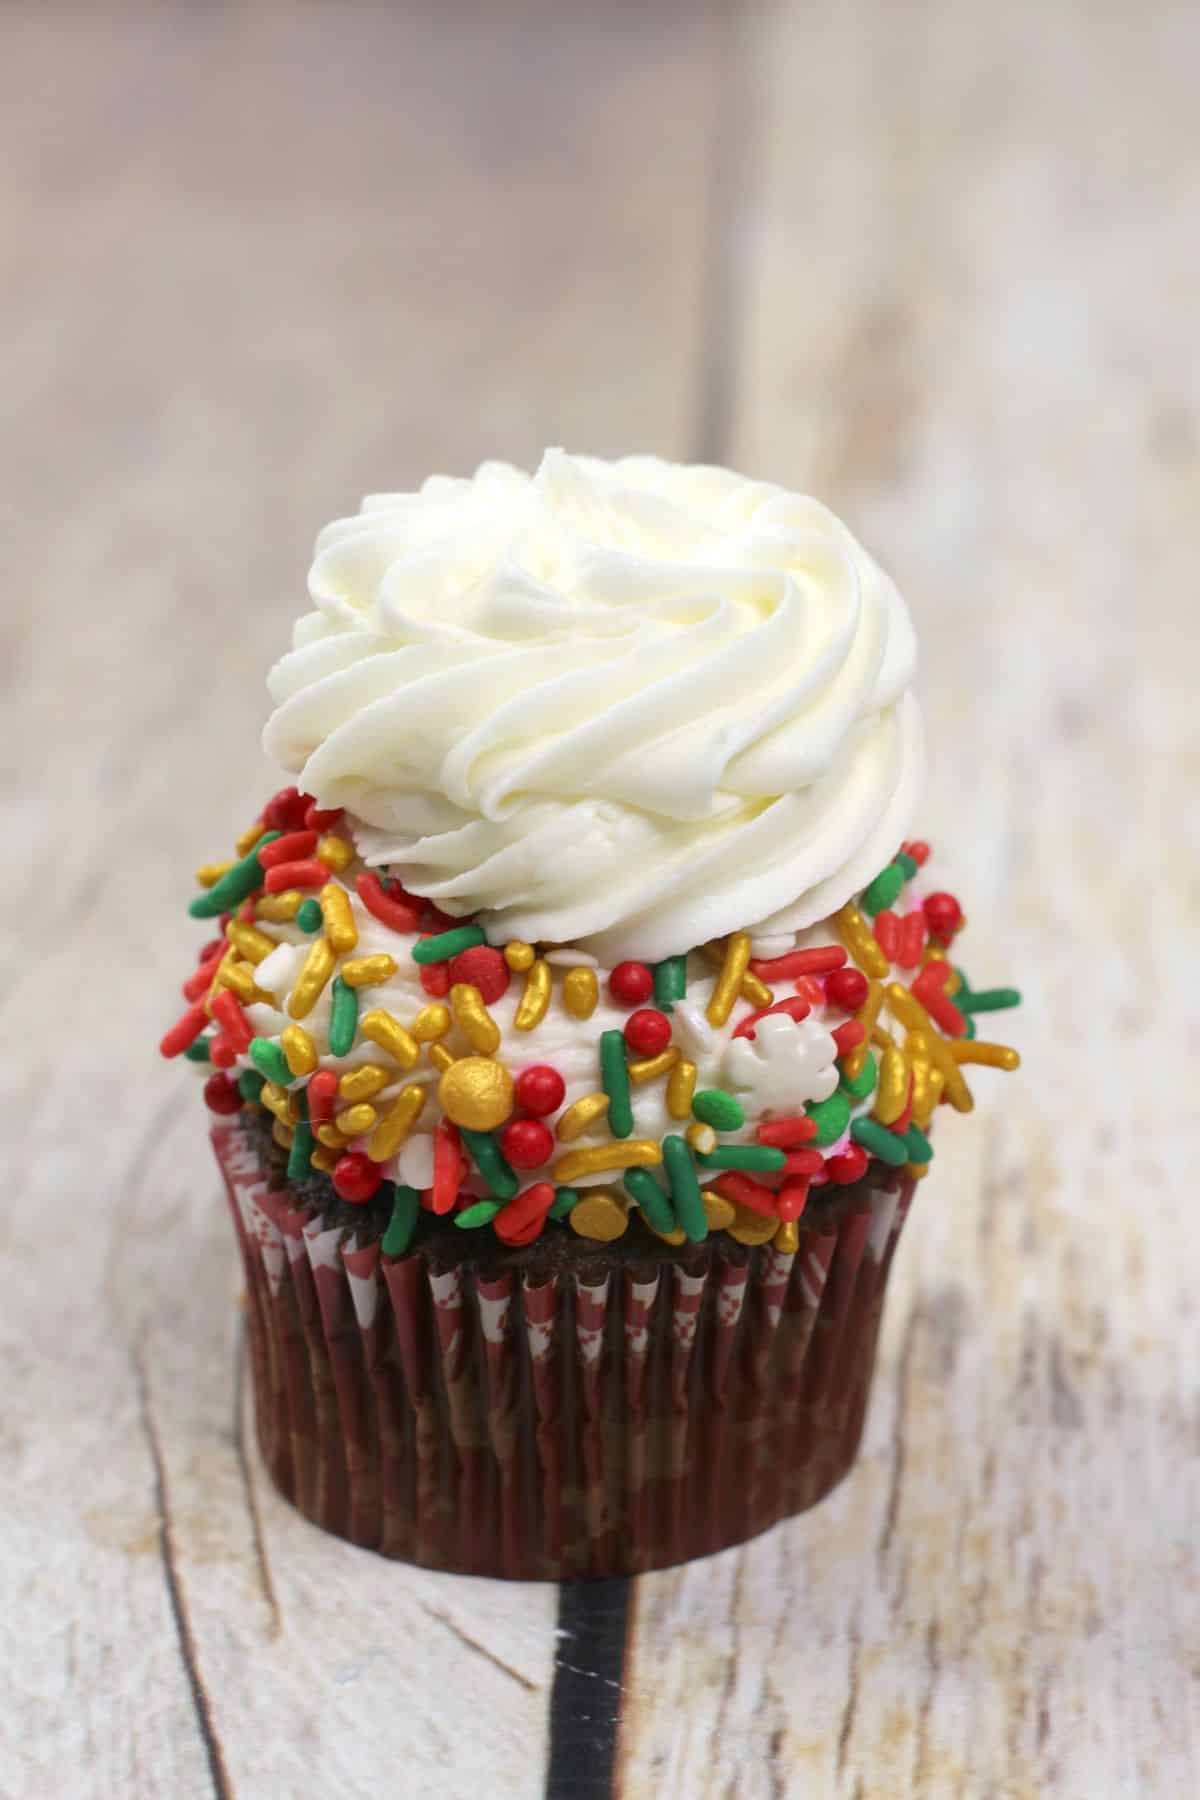 Another frosting is added on the top of the cupcake with sprinkles.